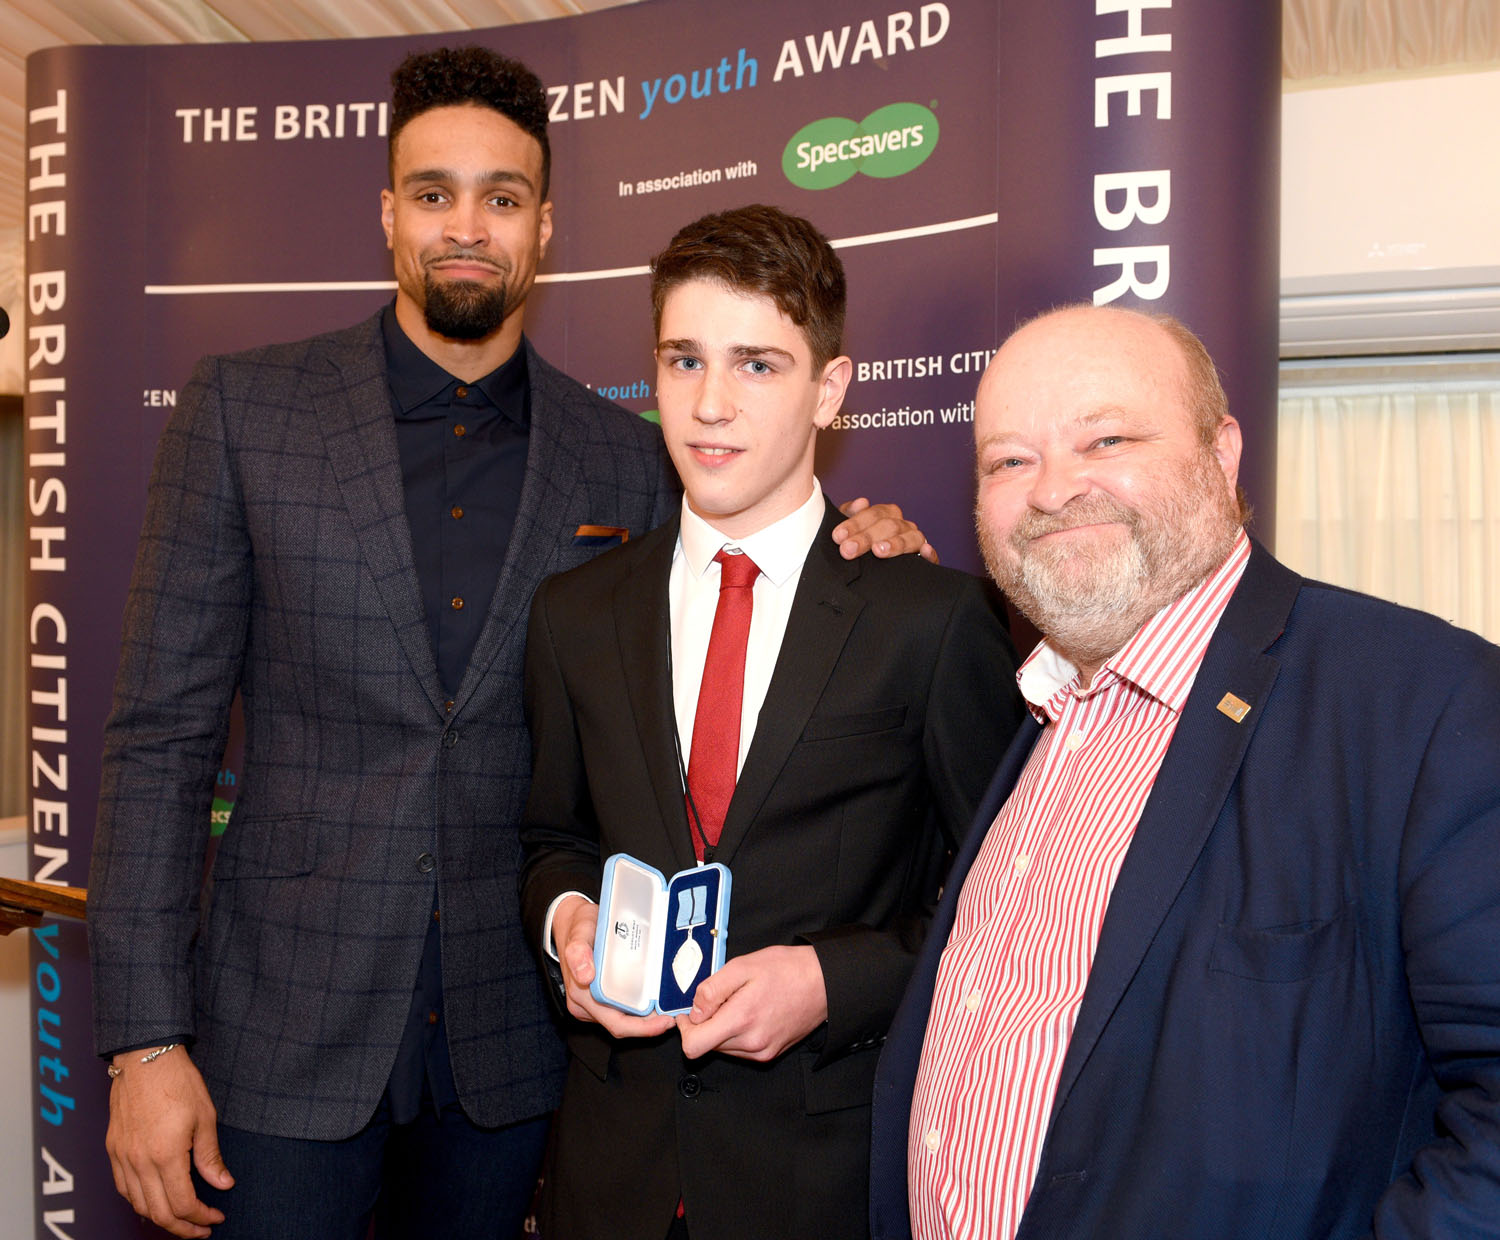 Town Teenager Honoured with British Citizen Youth Award